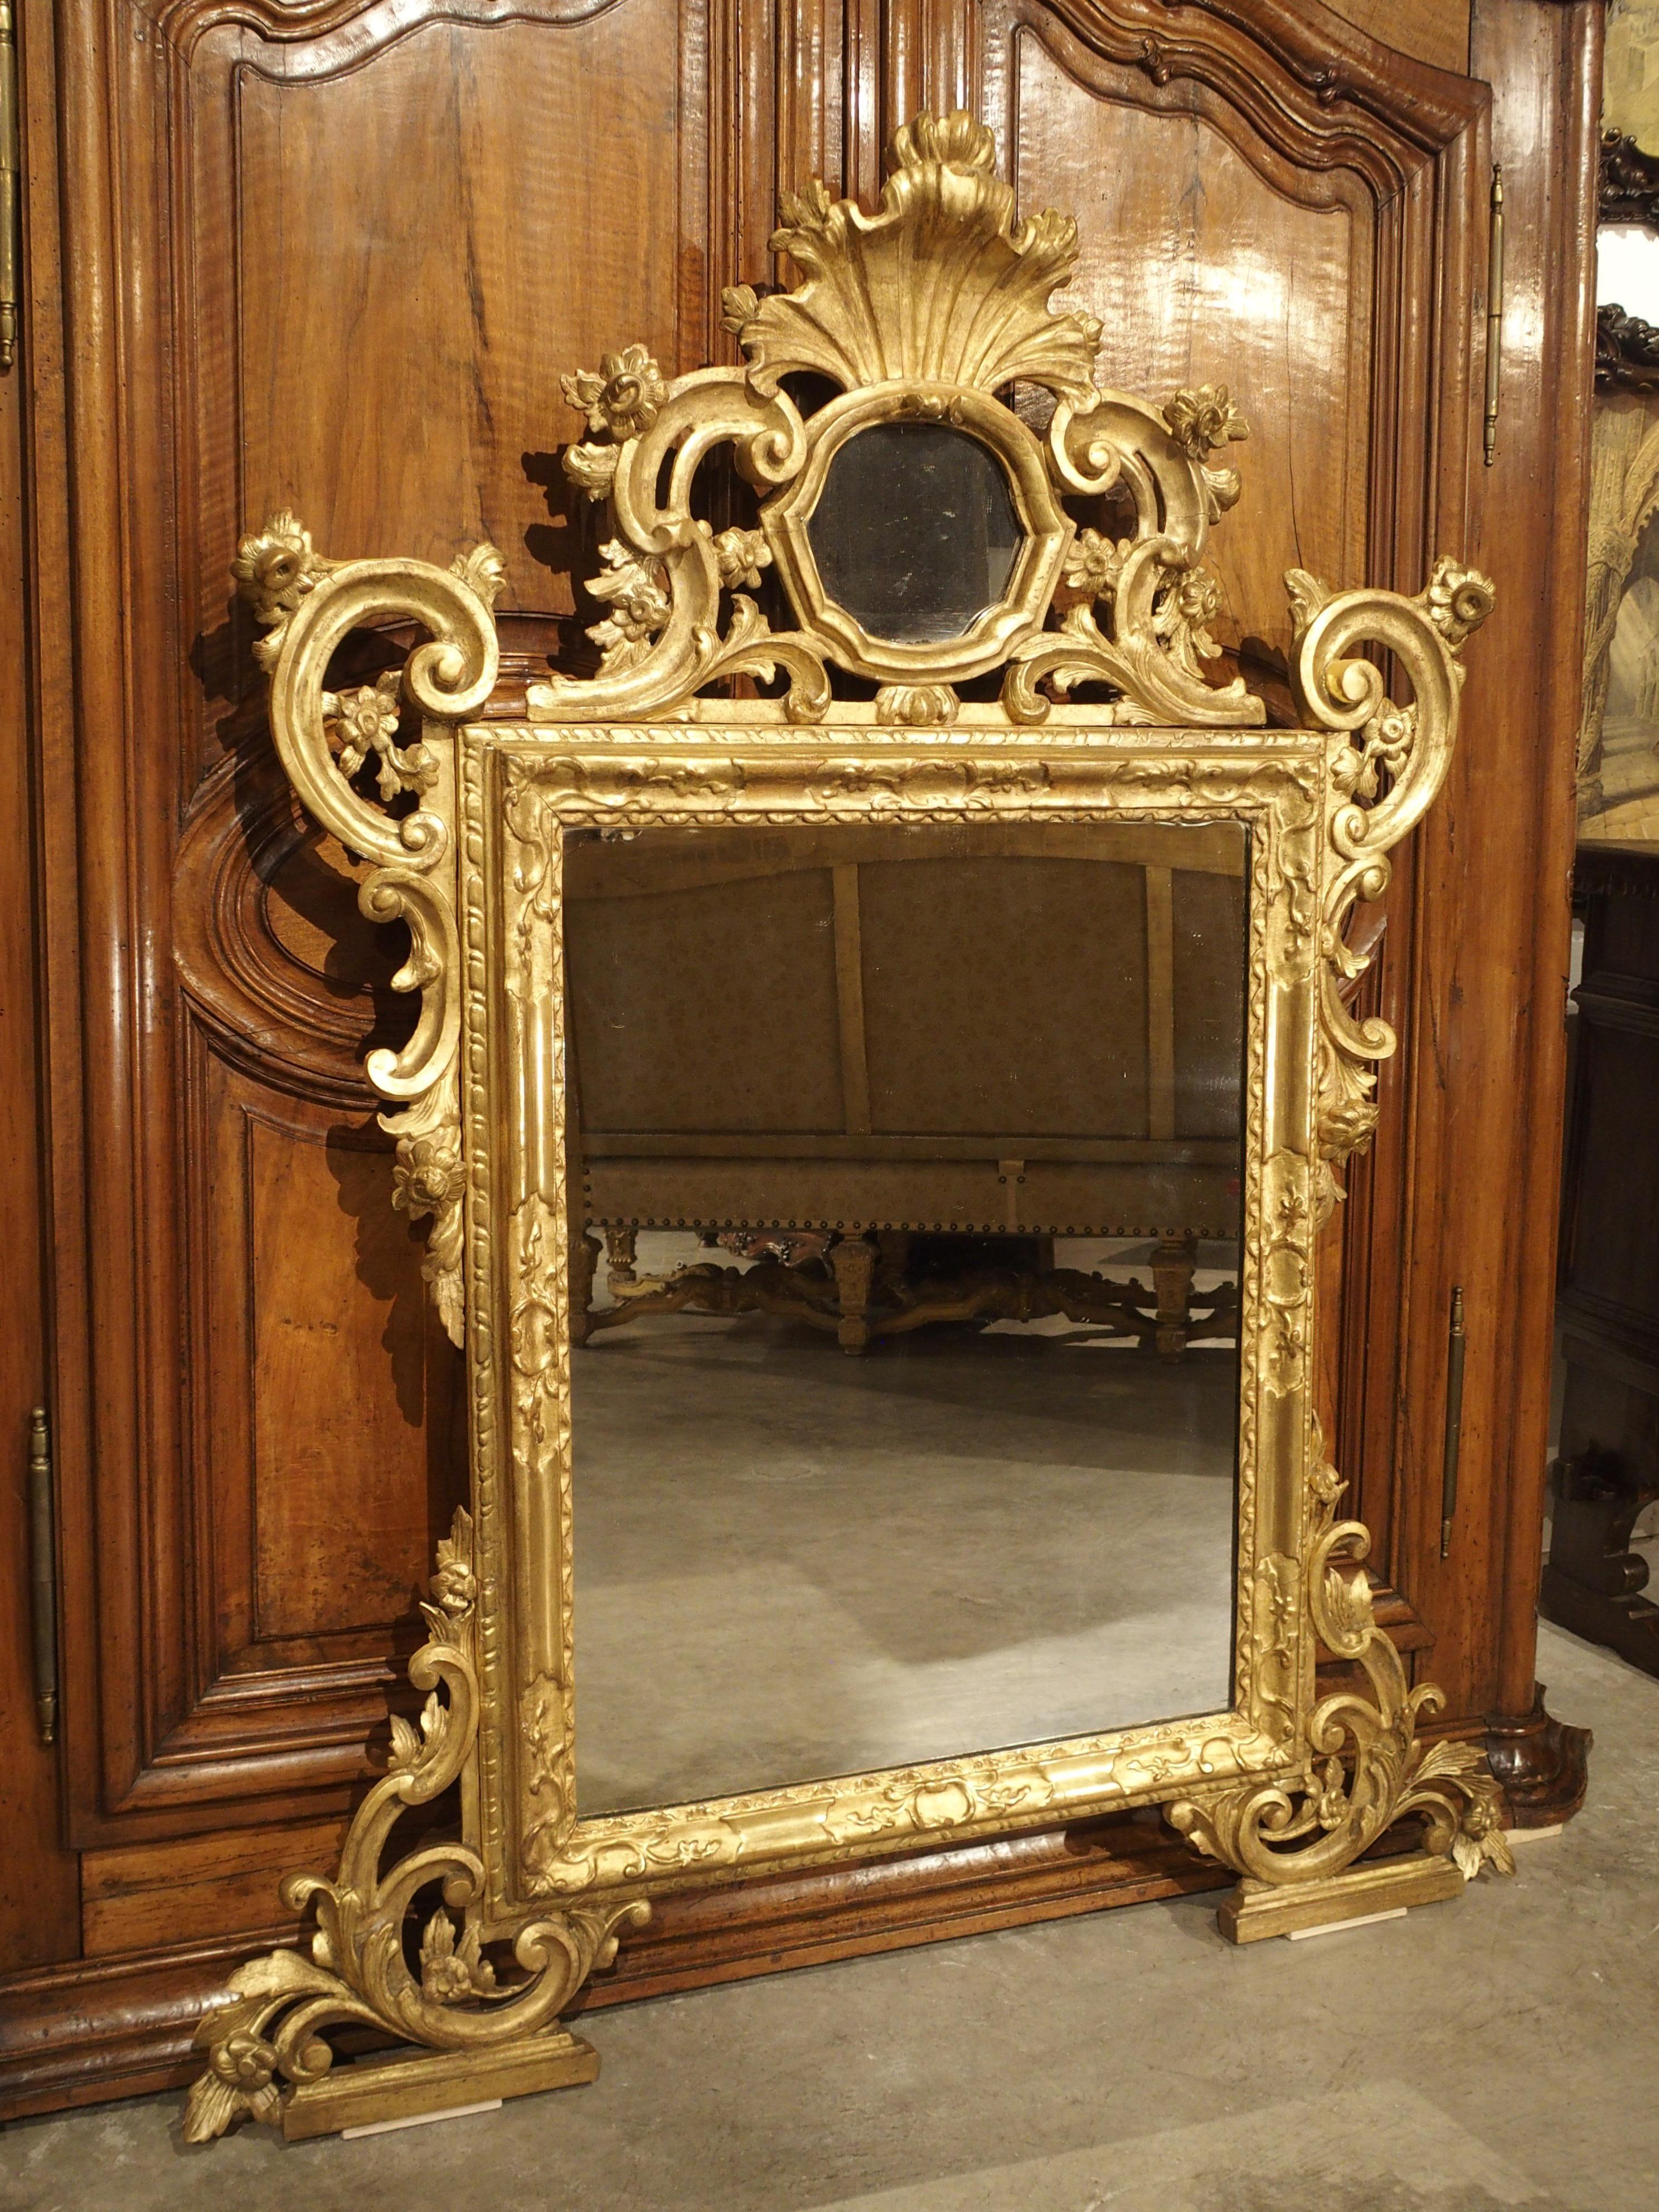 From Italy, circa 1850, this richly carved Venetian giltwood mirror features a small roughly circular mirror inset in an elaborate crown

A stylized shell with acanthus tips emanates from the top of the small mirror. This upper mirror is